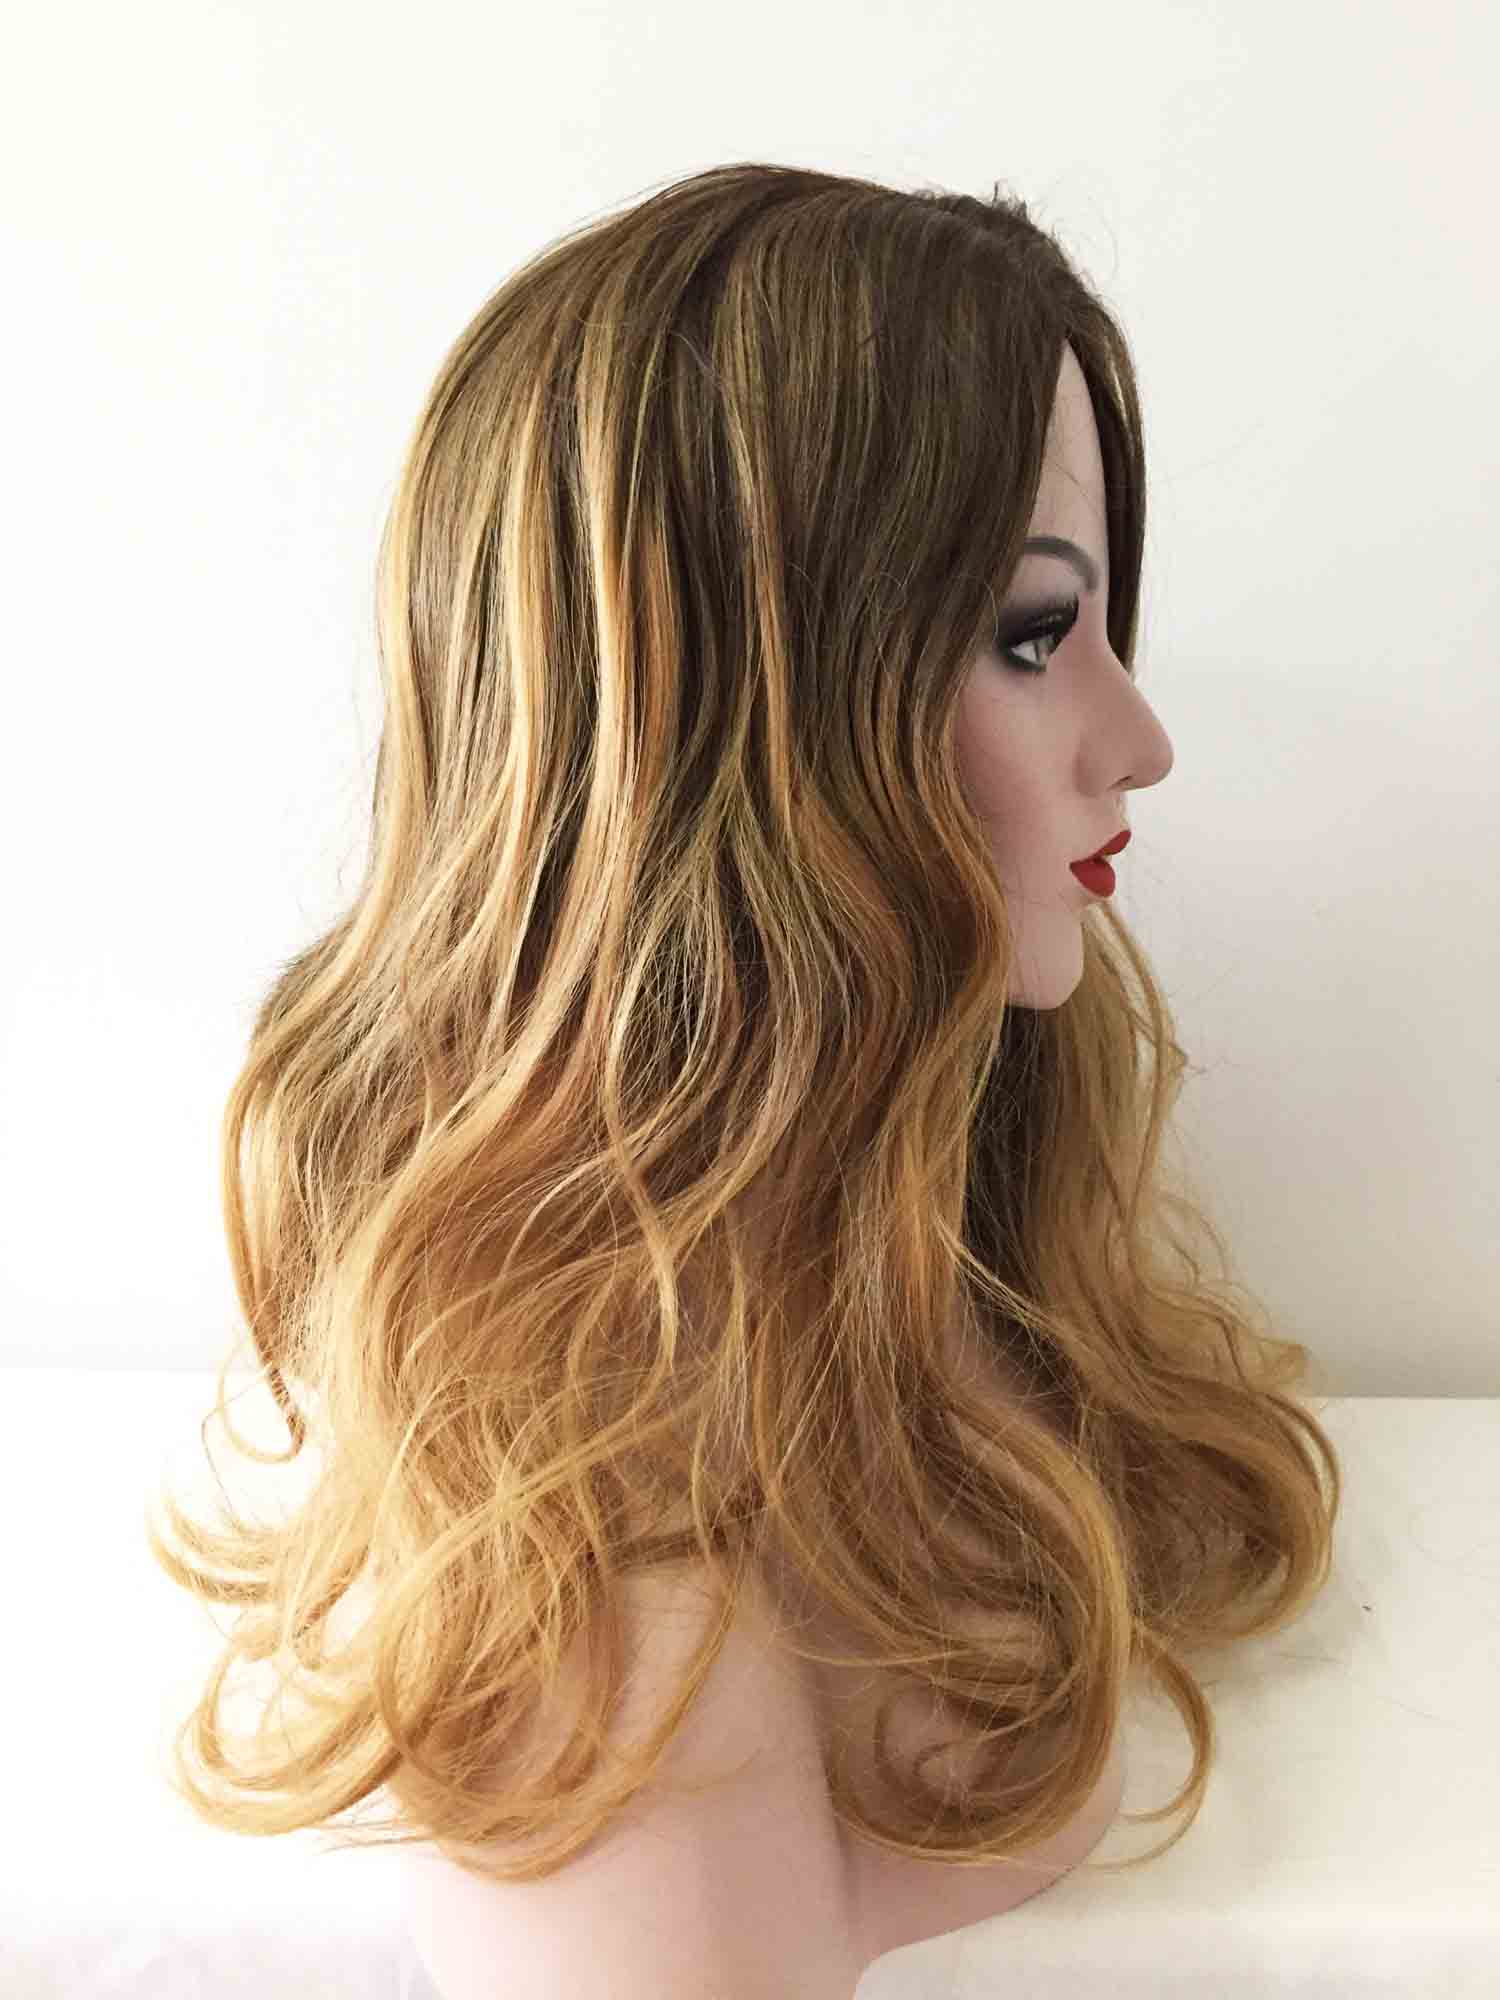 nevermindyrhead Women Blonde Ombre Long Curly Side Part Wig